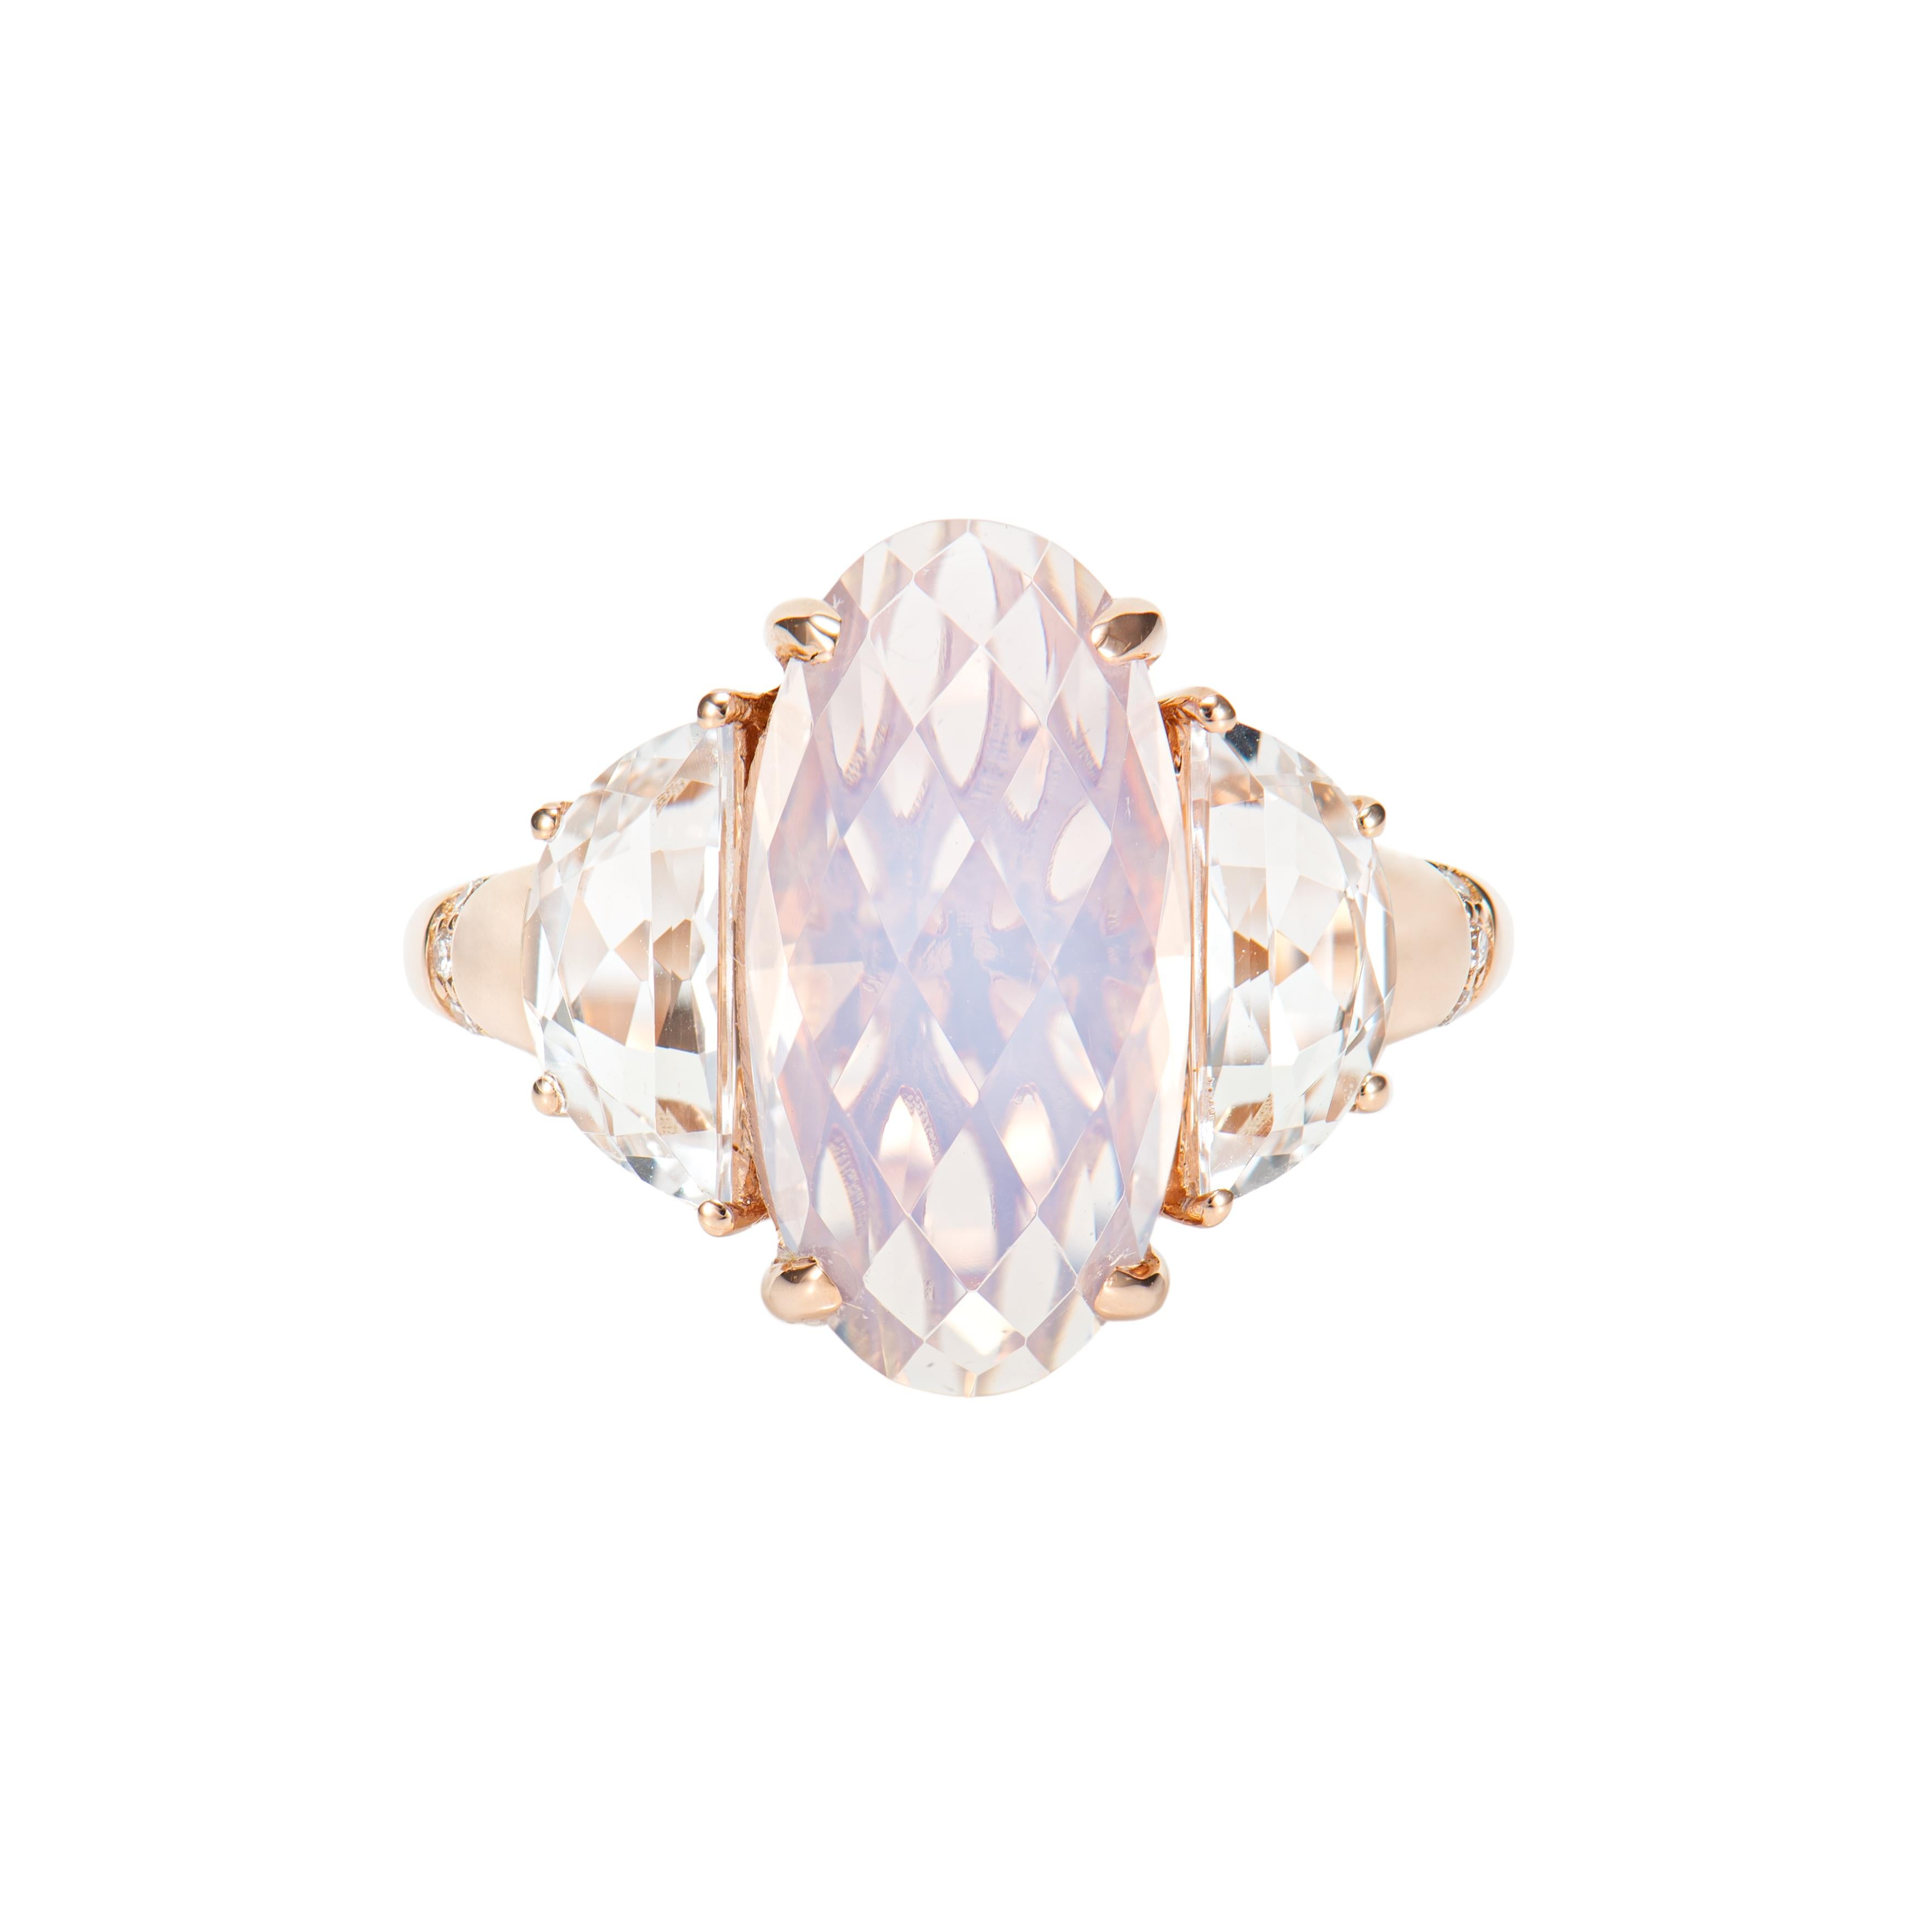 Contemporary 5.29 Carat Lavender Quartz Antique Ring in 18KRG with White Topaz and Diamond. For Sale